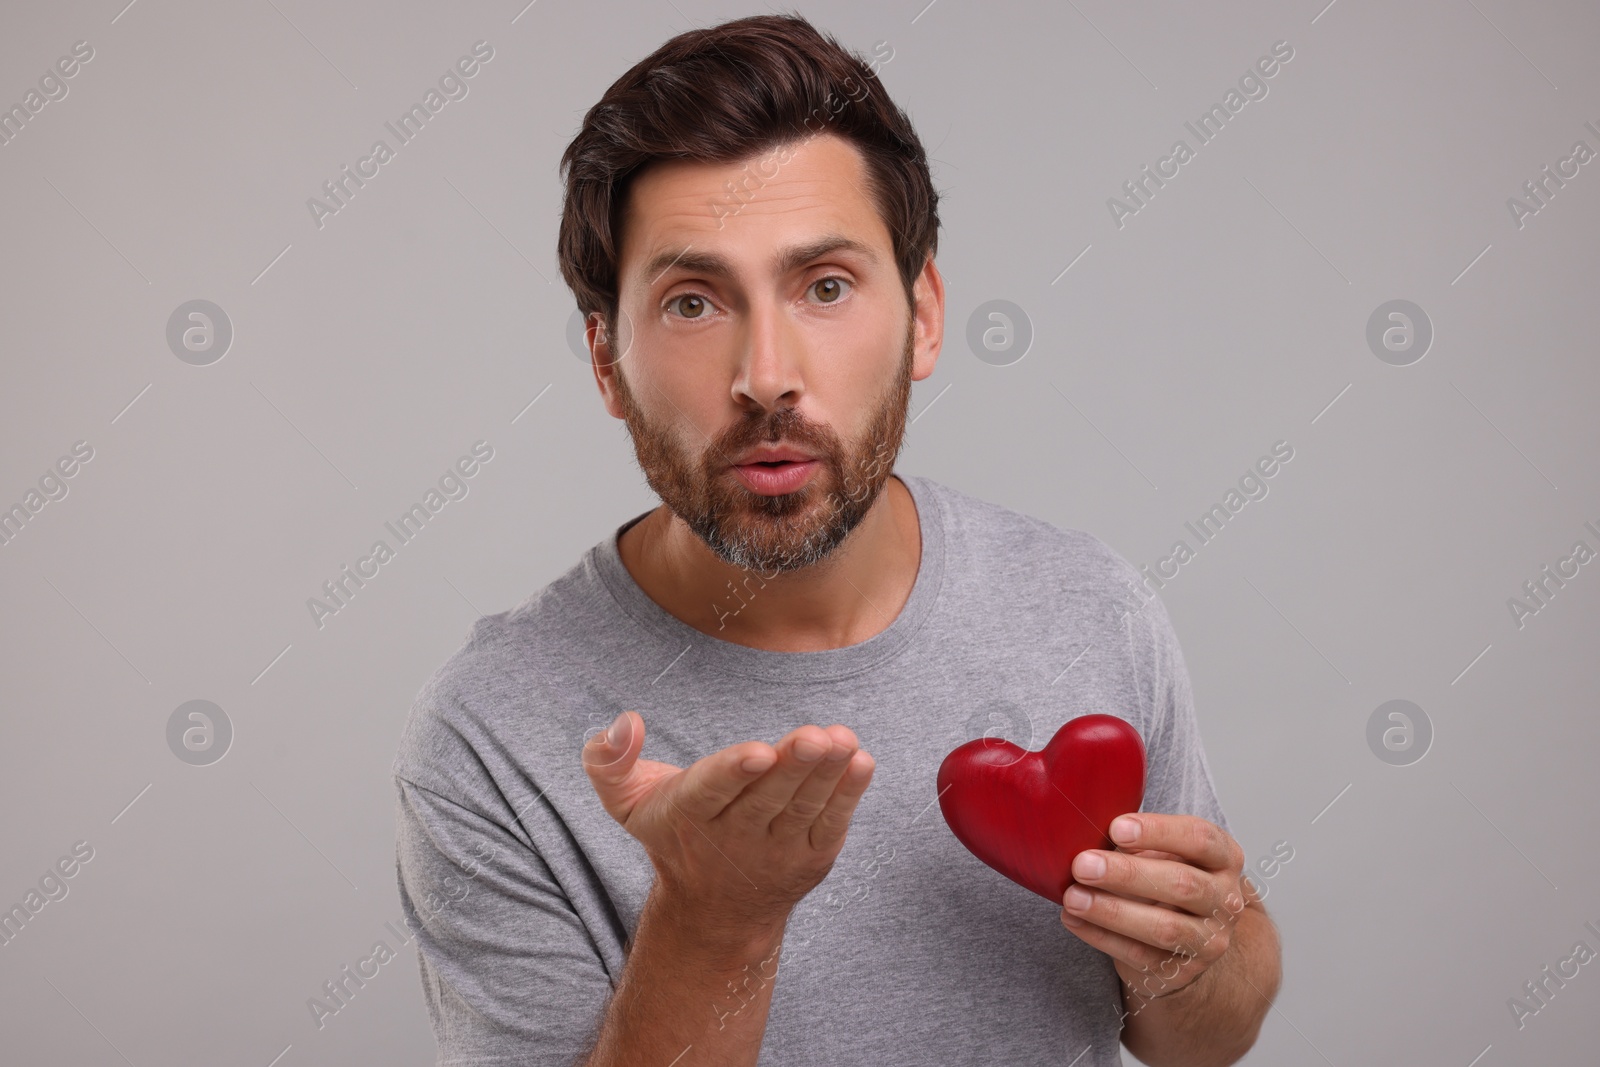 Photo of Man holding red heart and blowing kiss on grey background